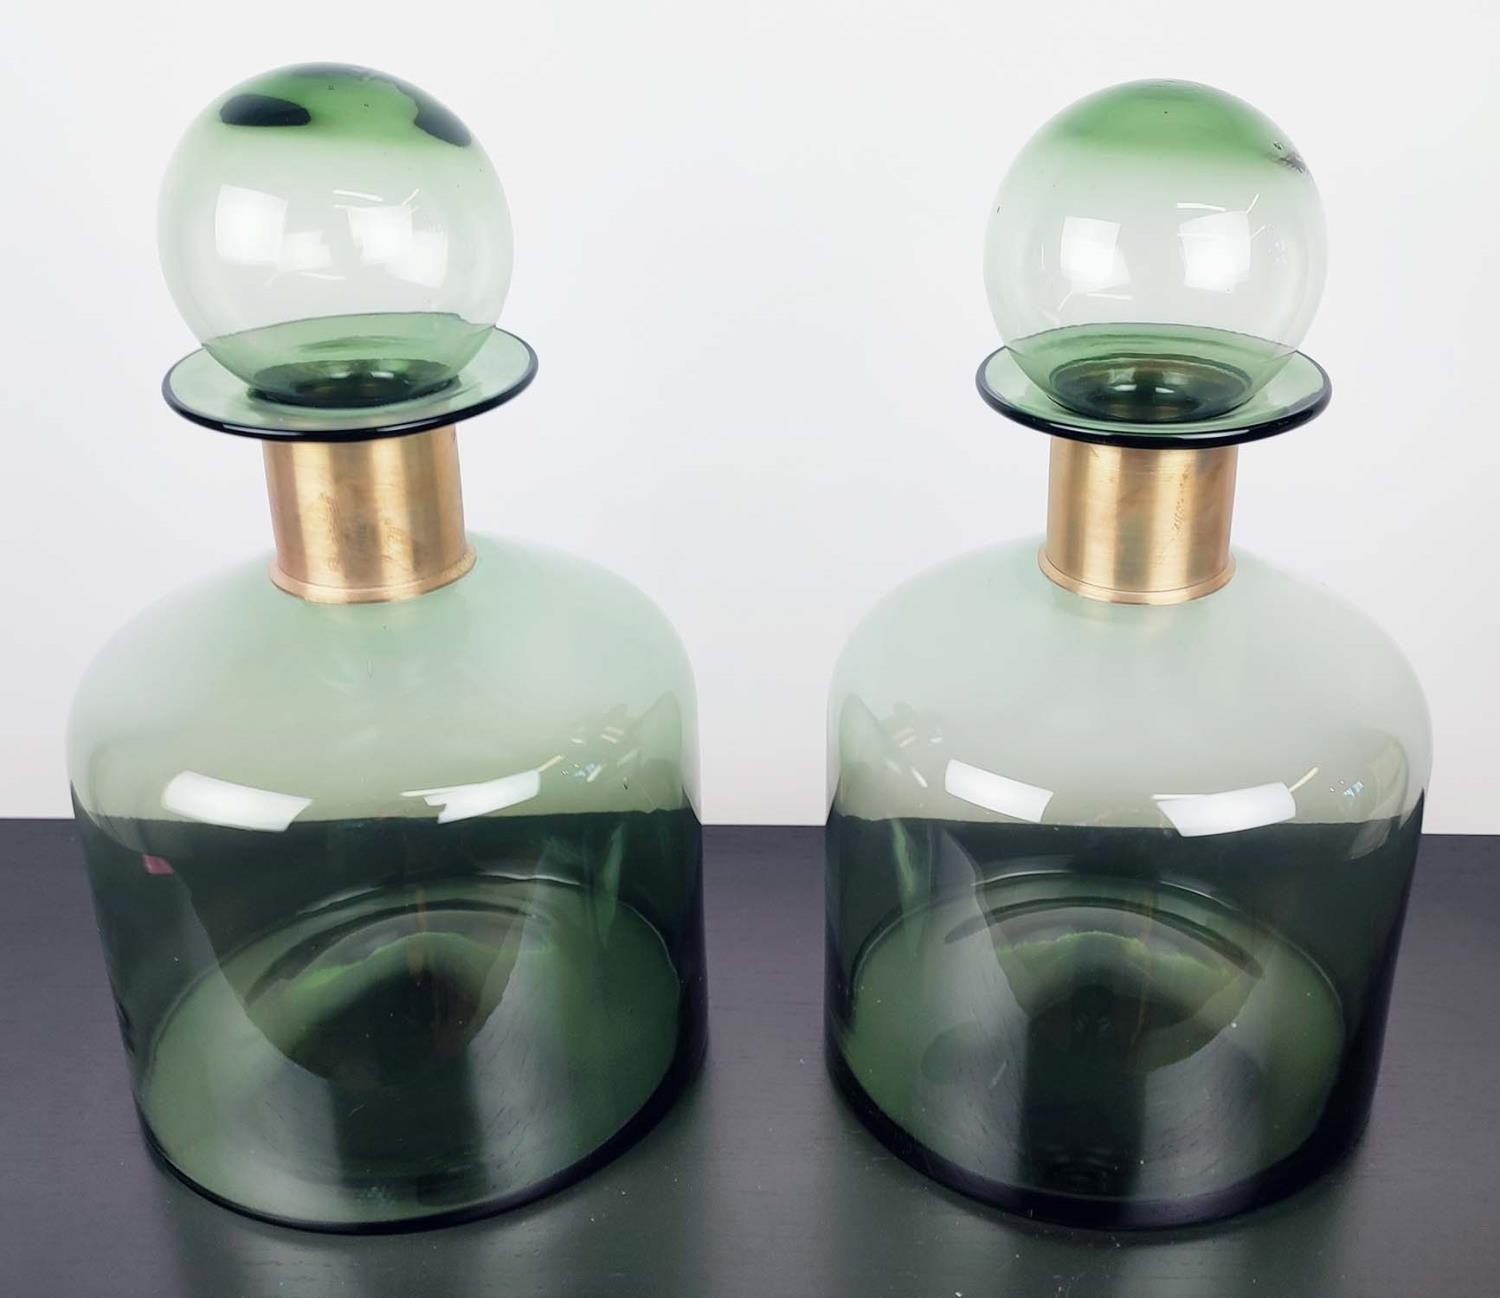 DECANTERS, a pair, Murano style, green glass, gilt metal collars, 37cm high. (2) - Image 3 of 3